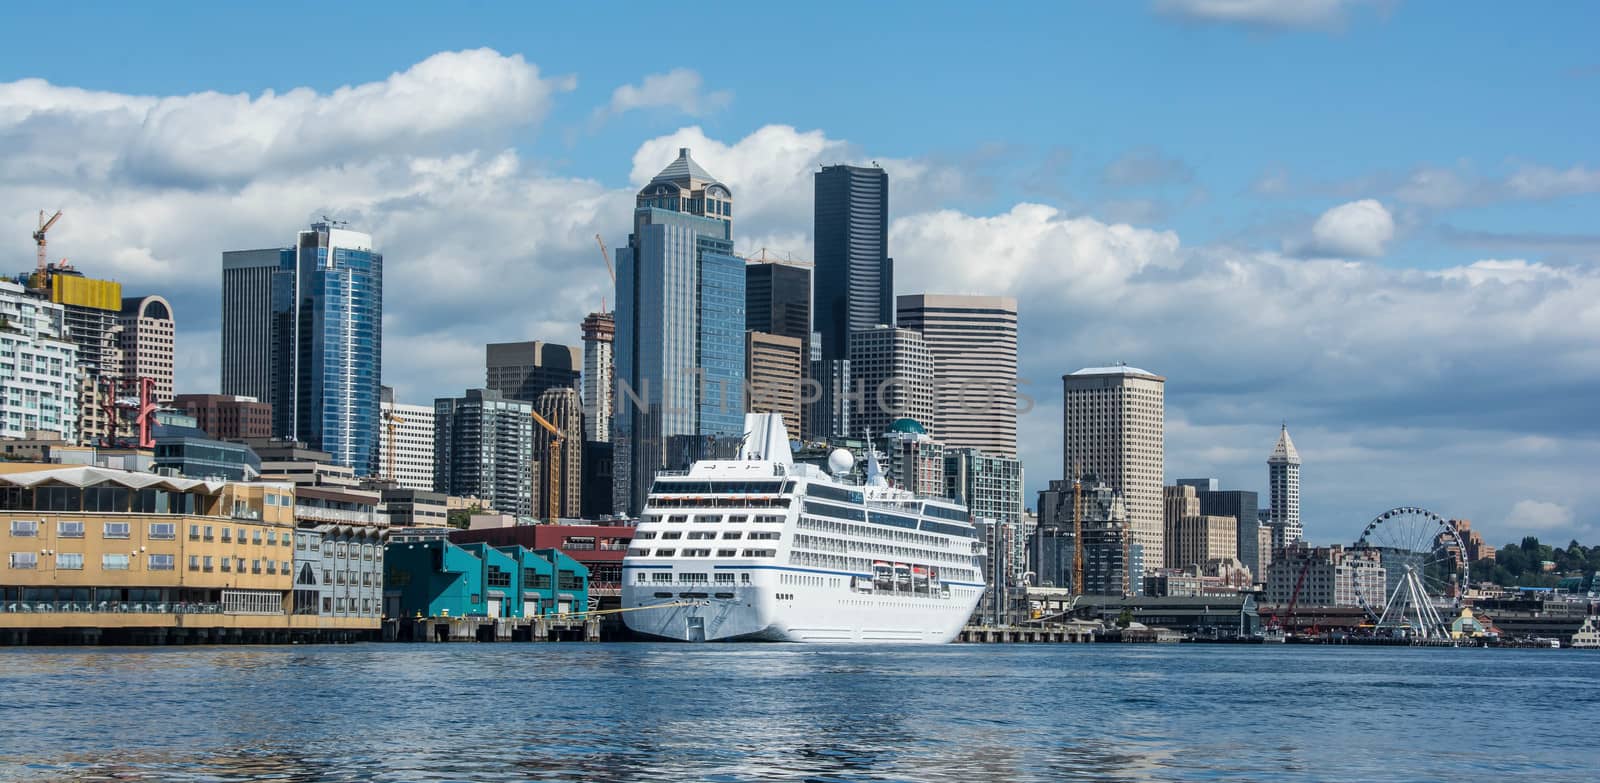 Seattle Waterfront with Cruise Ship at Terminal by cestes001